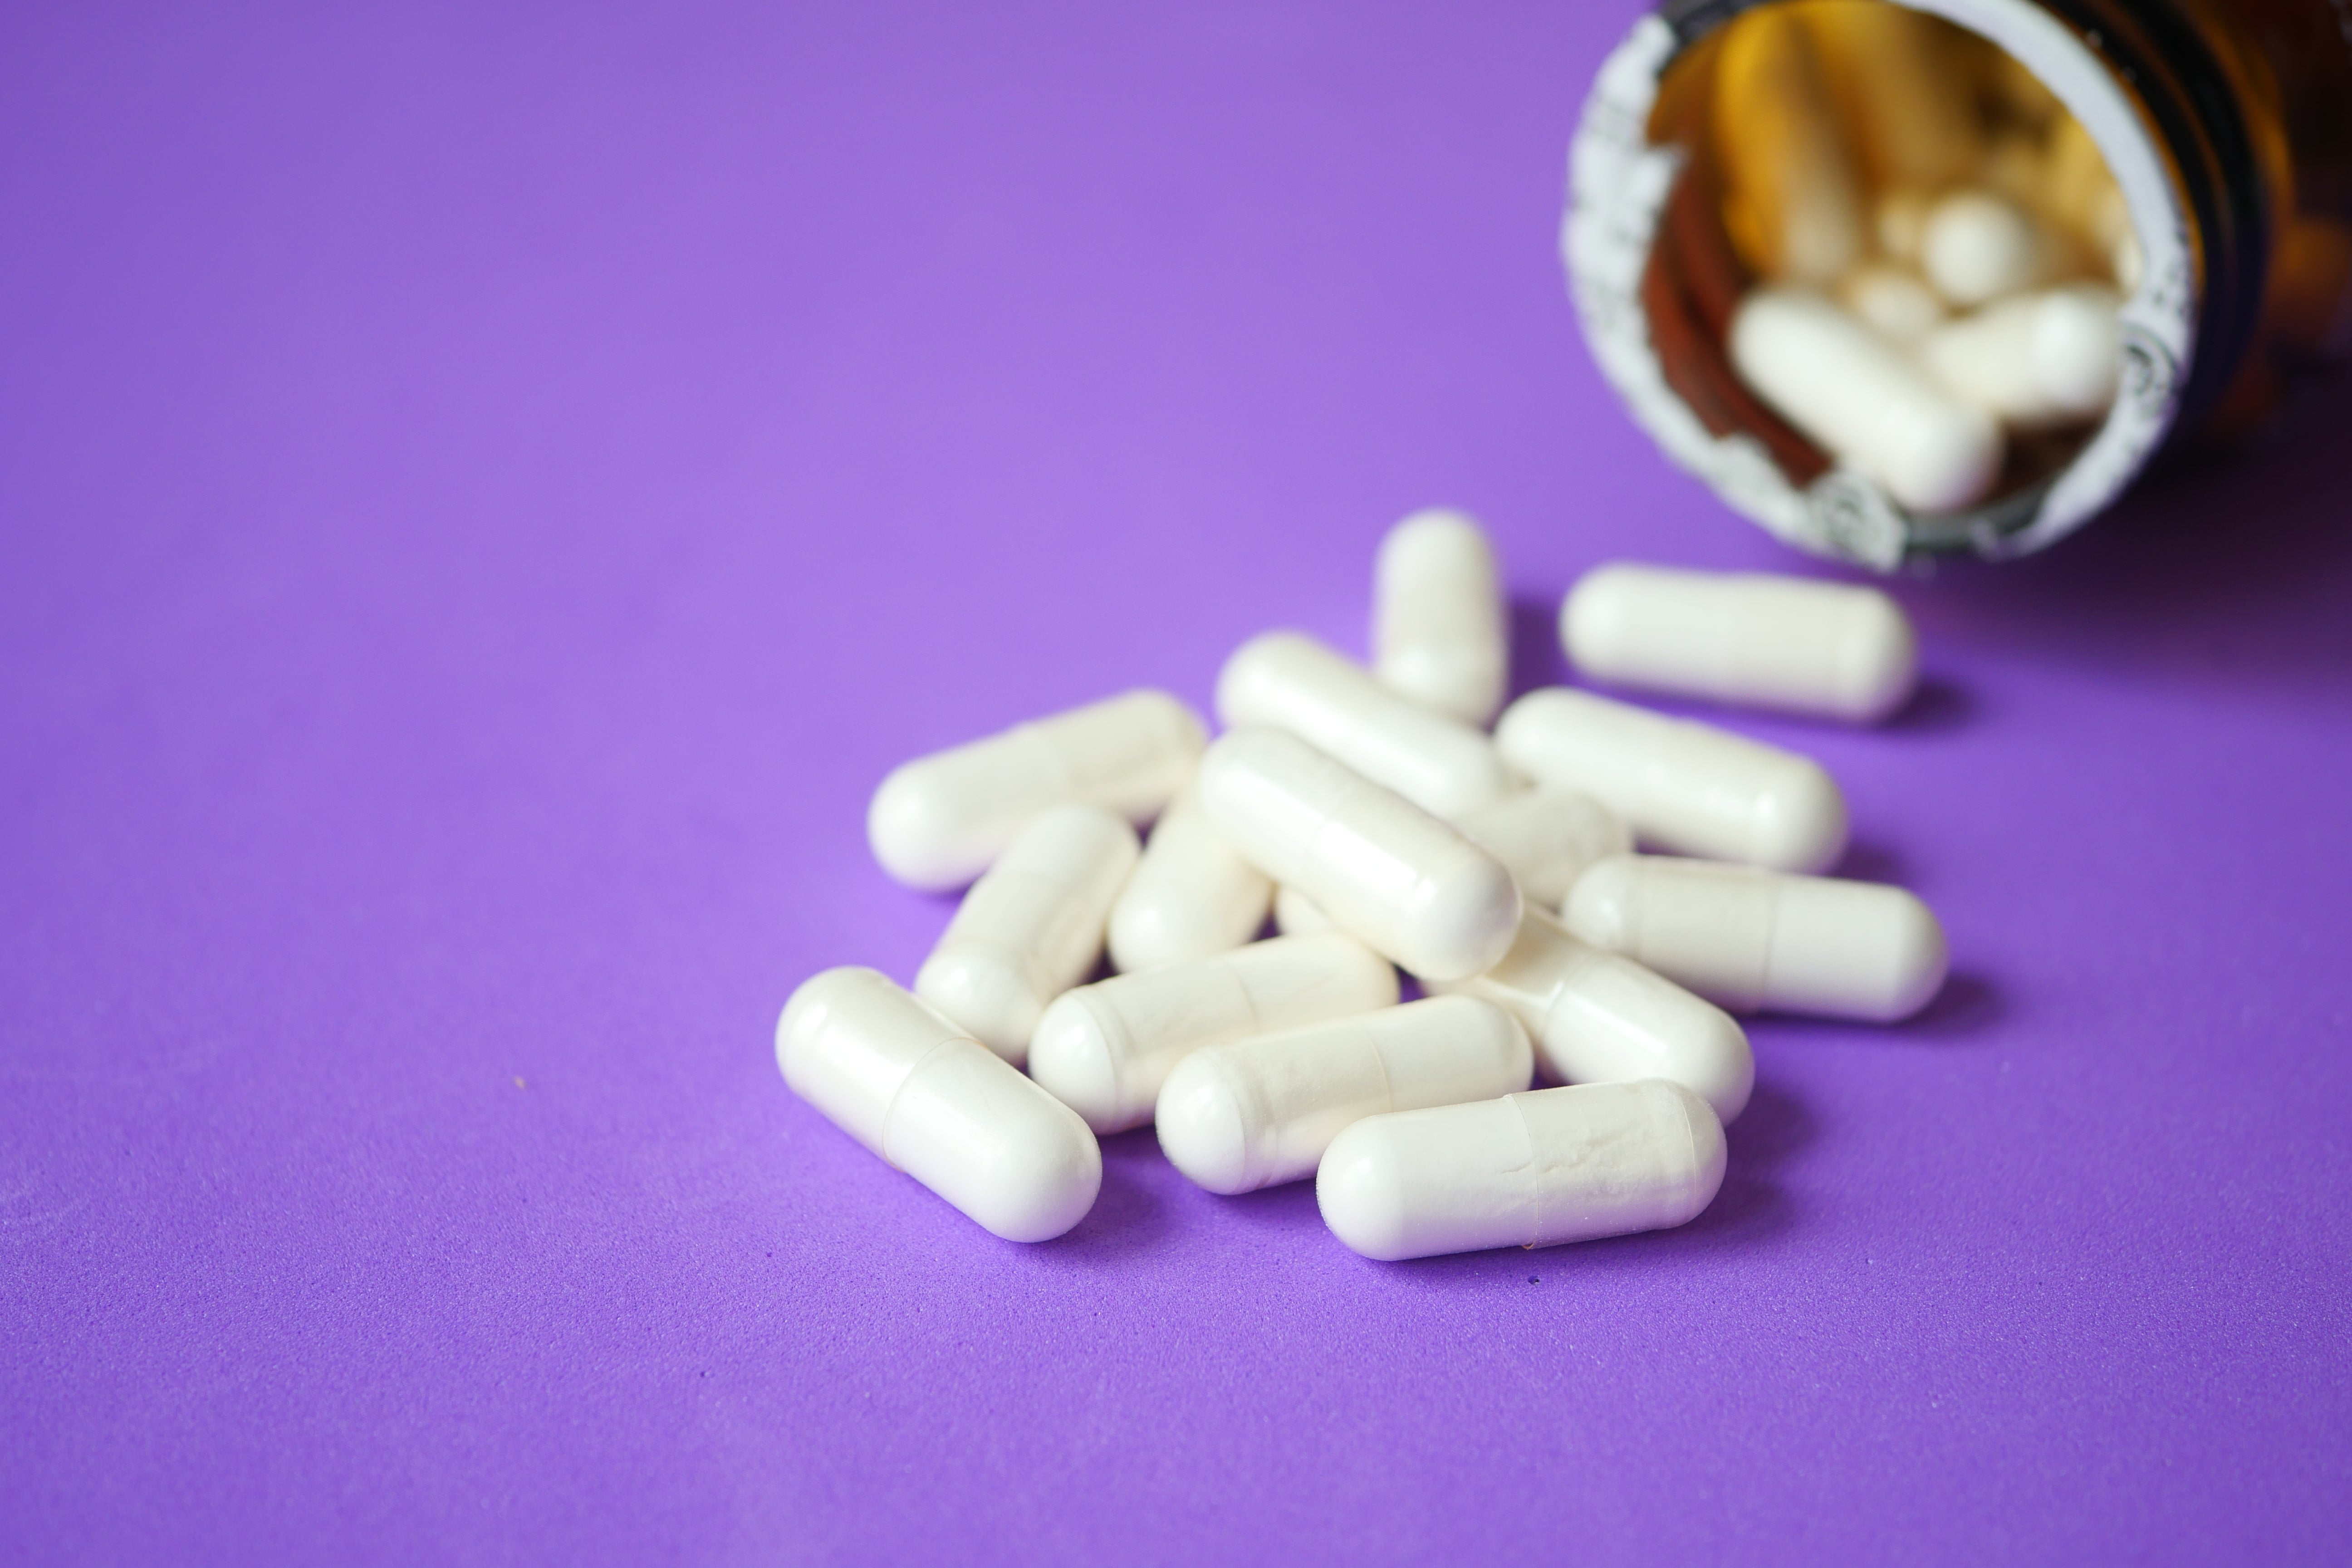 Calcium's Effect on the Heart - Do You Need to Supplement?